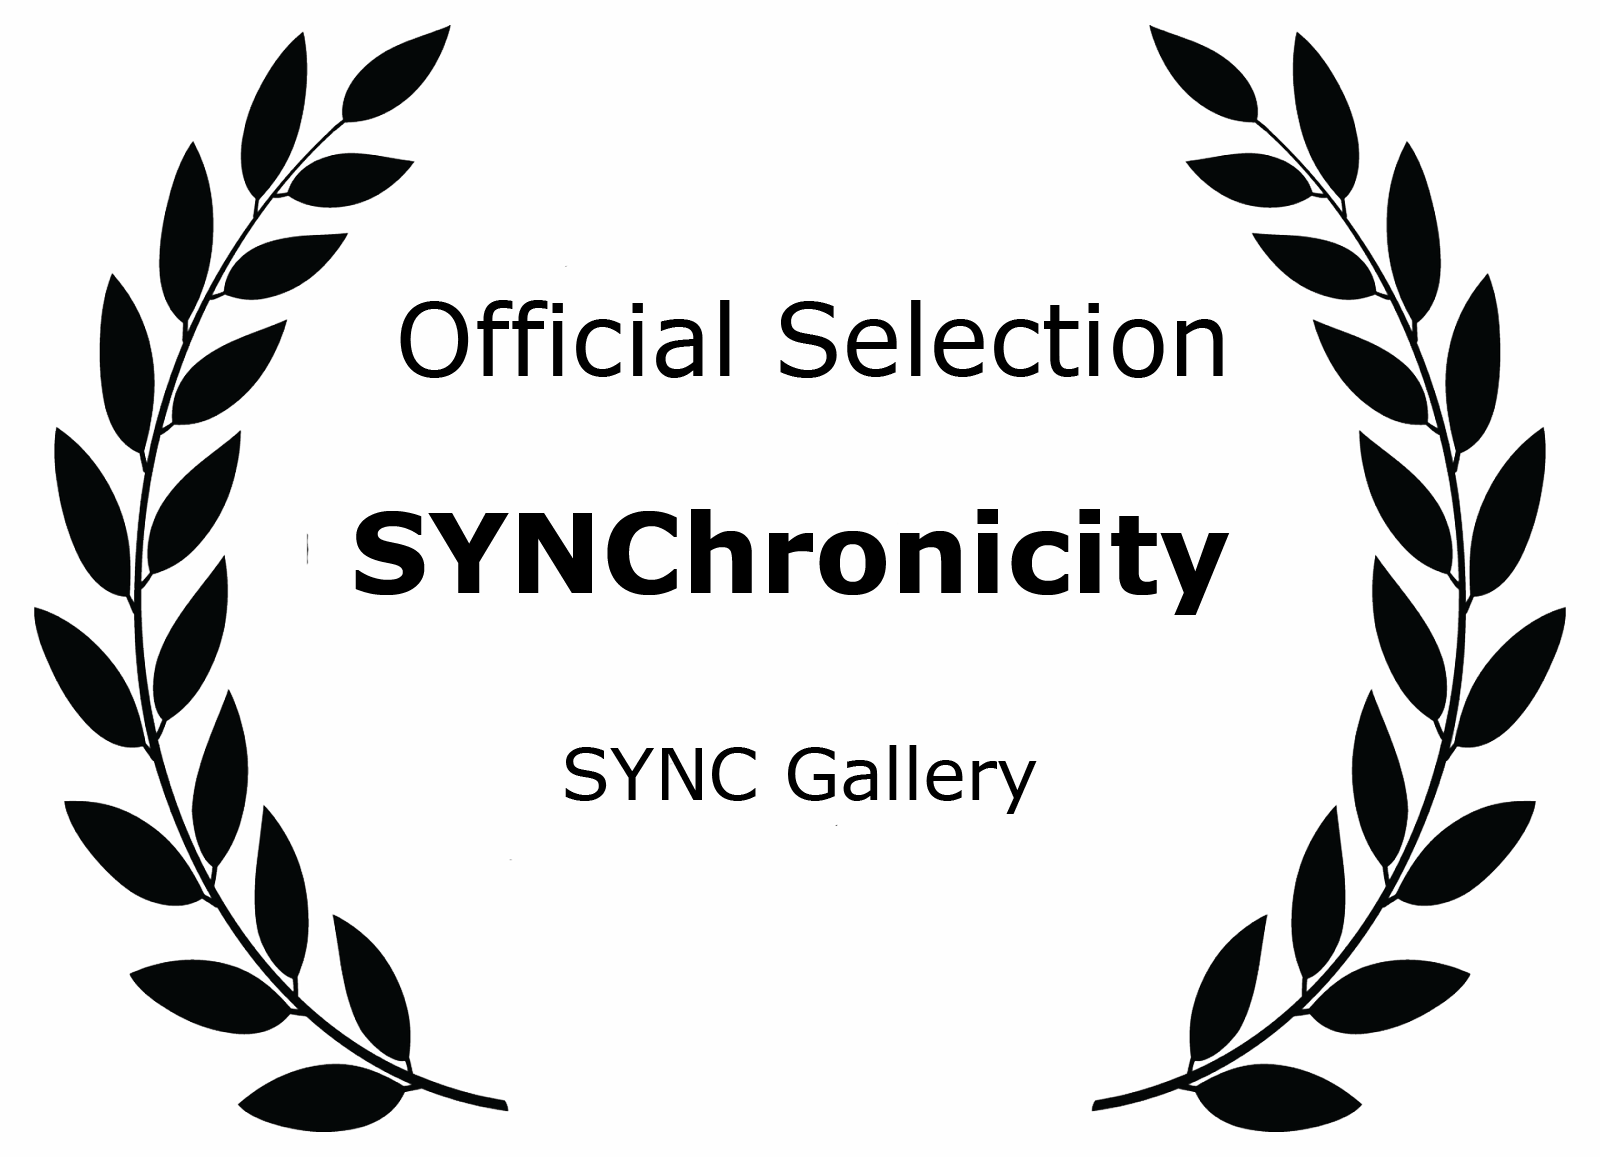 Official Selection SYNChronicity SYNC Gallery